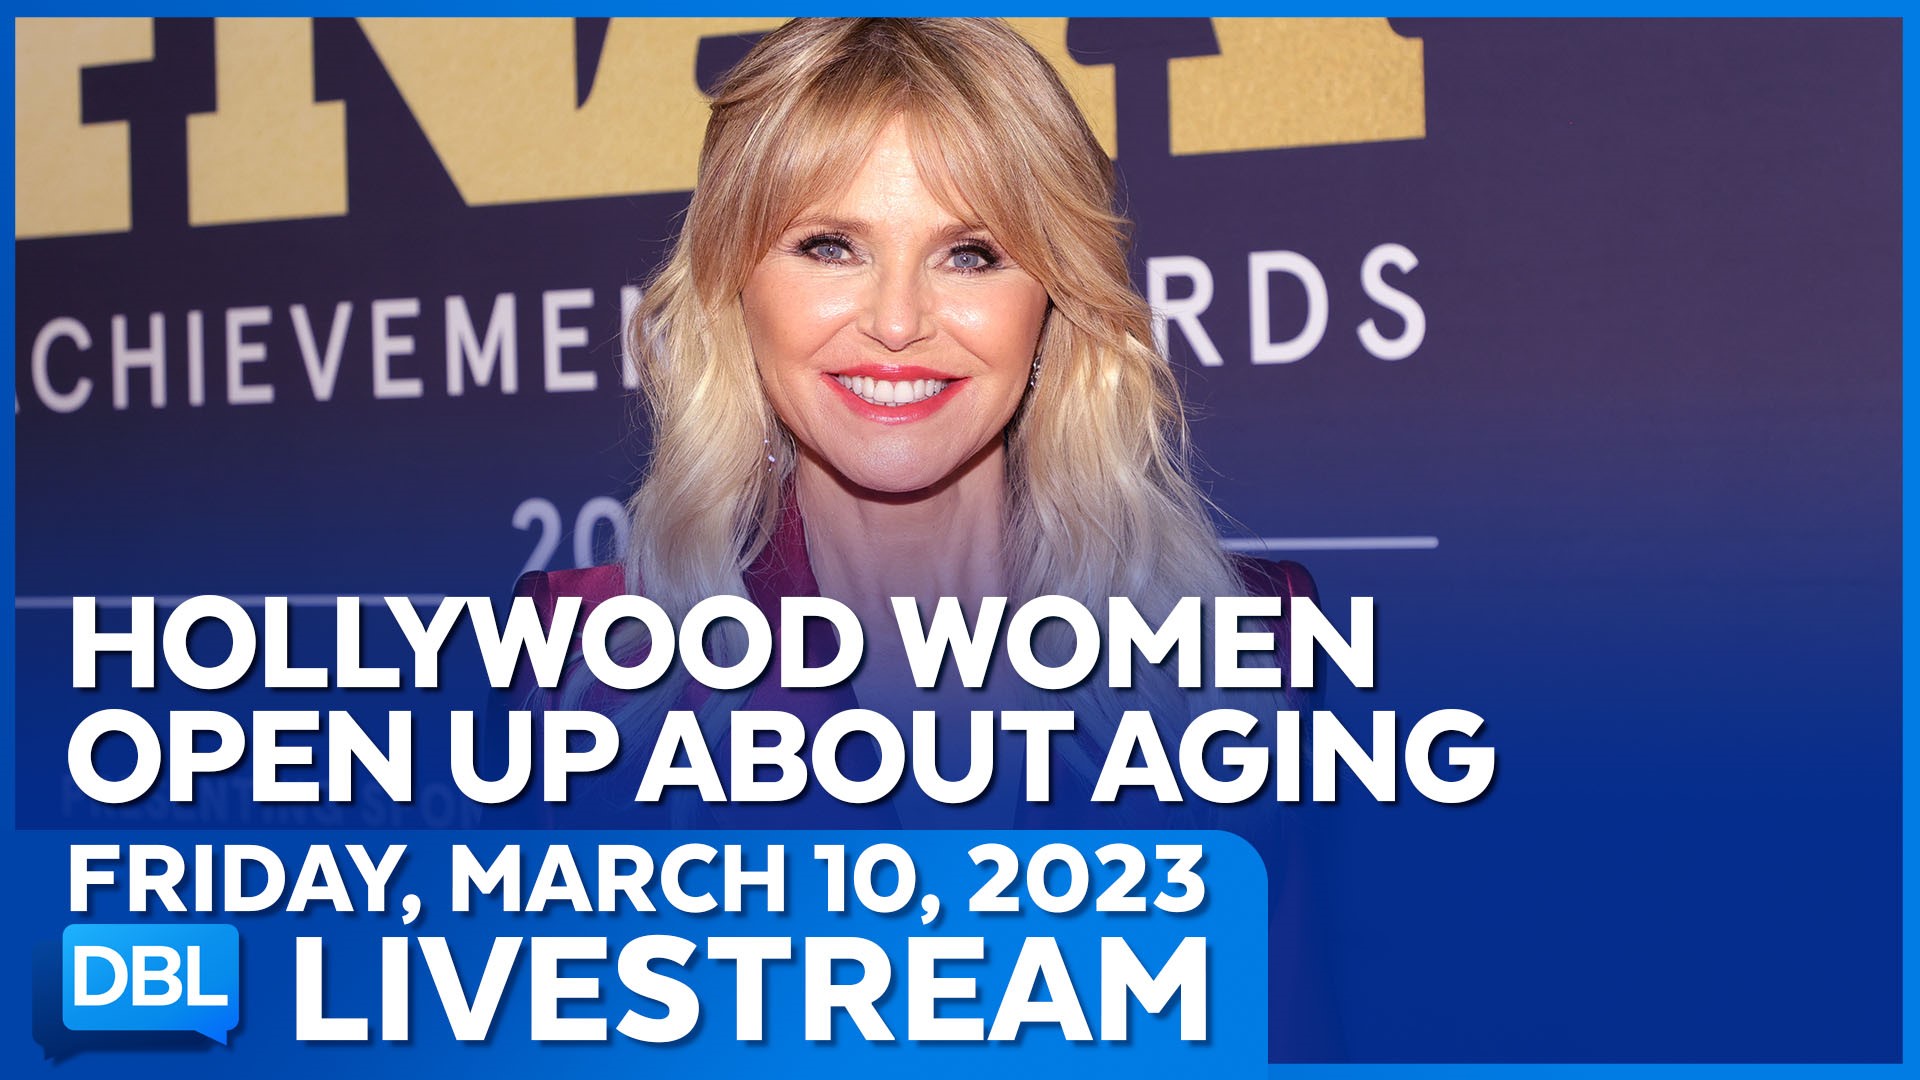 Hollywood women open up about aging; a murder suspect makes a run for it; Daylight Saving Time begins this weekend. Should we stop changing the clocks?